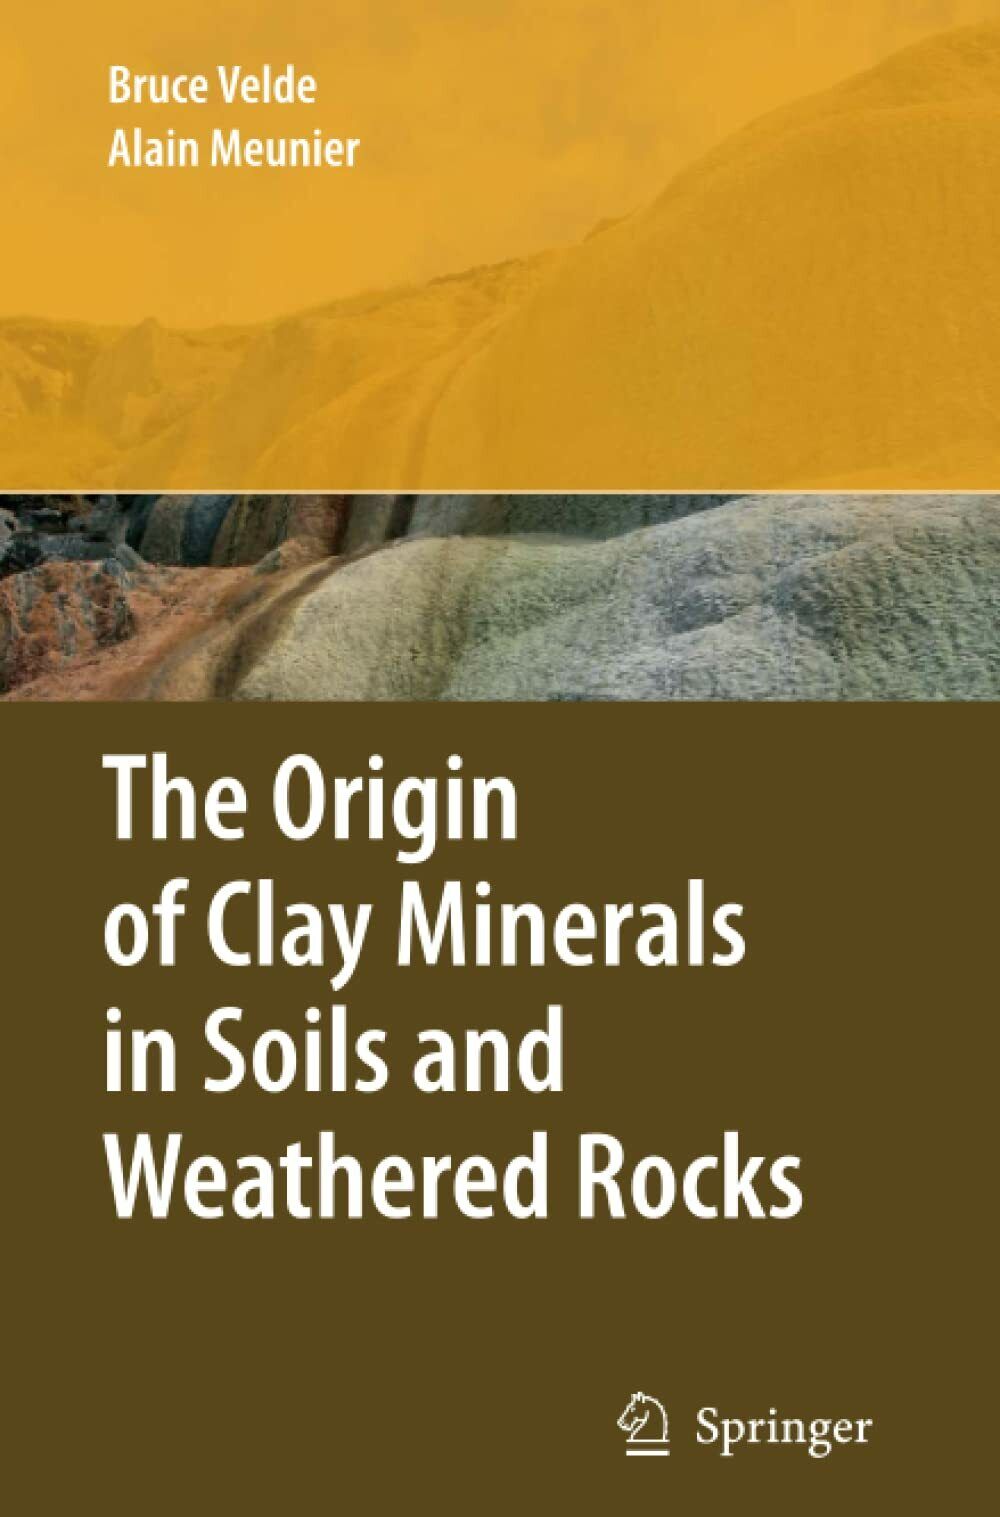 The Origin of Clay Minerals in Soils and Weathered Rocks - Alain Meunier - 2010 libro usato